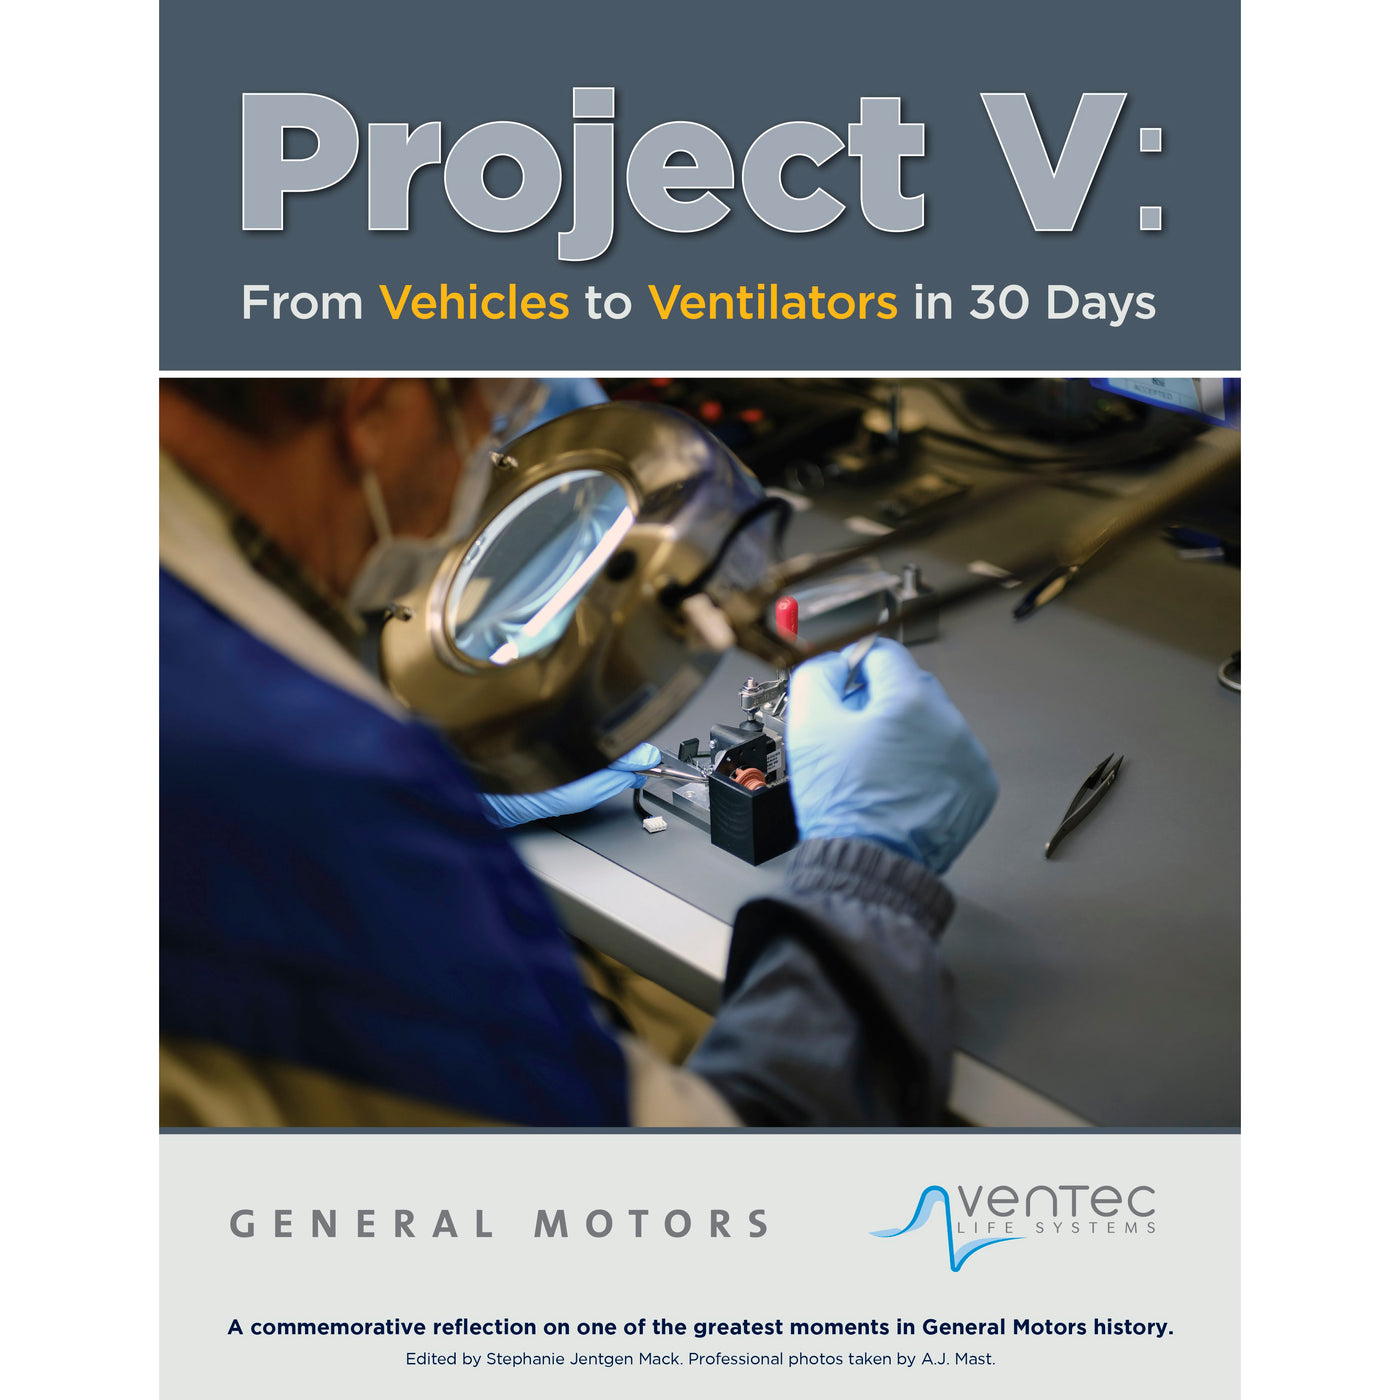 Project V: From Vehicles to Ventilators in 30 Days